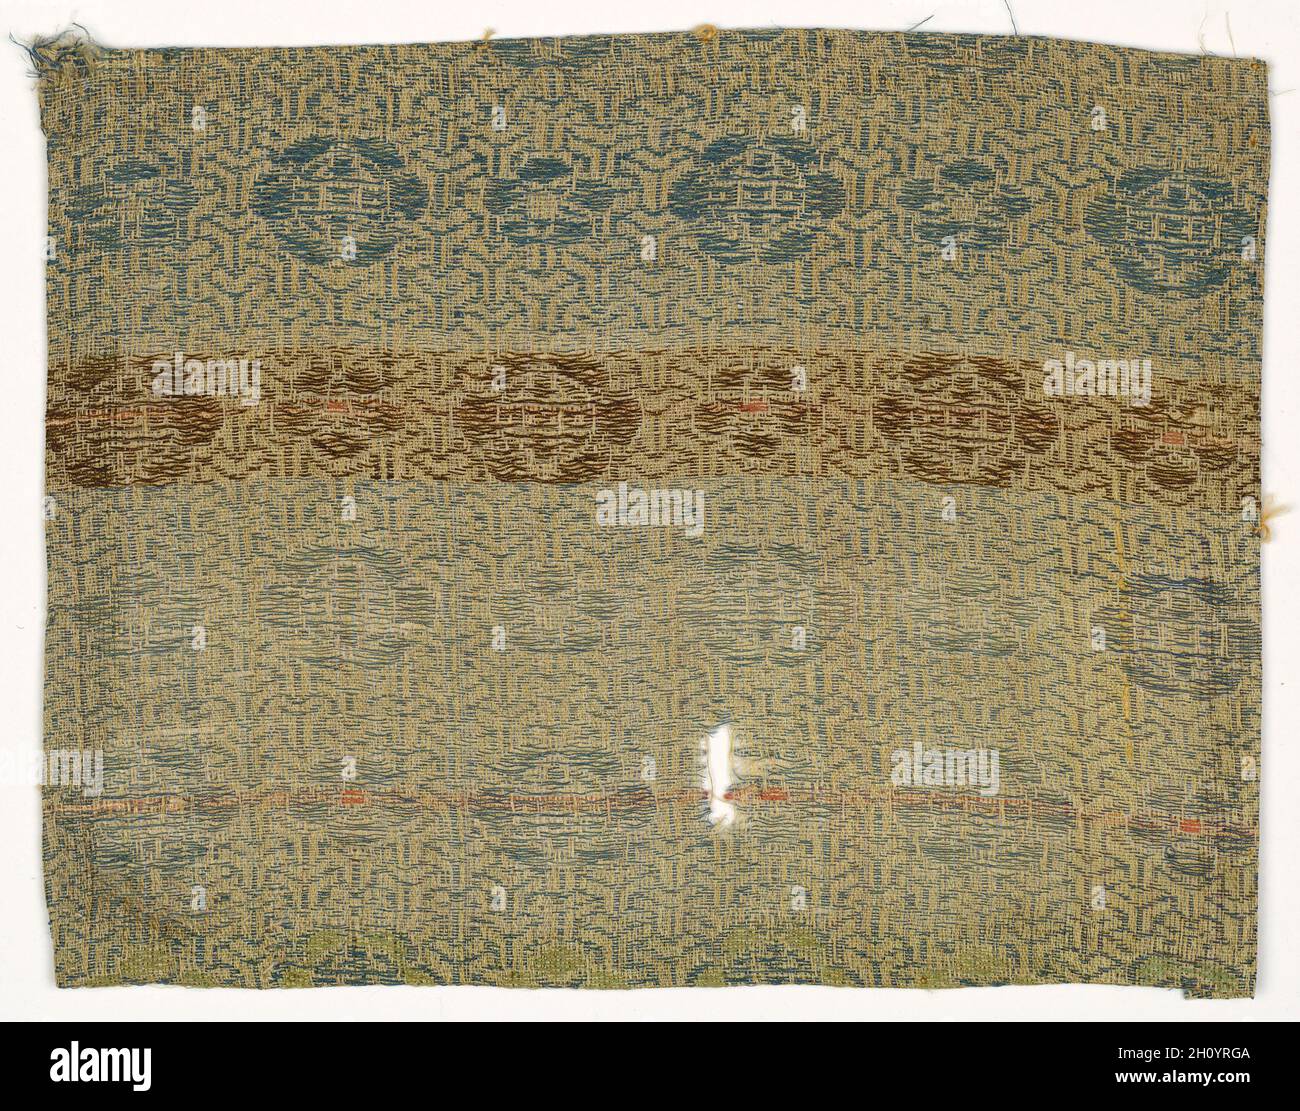 Fragment, 1800s. China ?, 19th century. Silk; overall: 14 x 10.8 cm (5 1/2 x 4 1/4 in.). Stock Photo